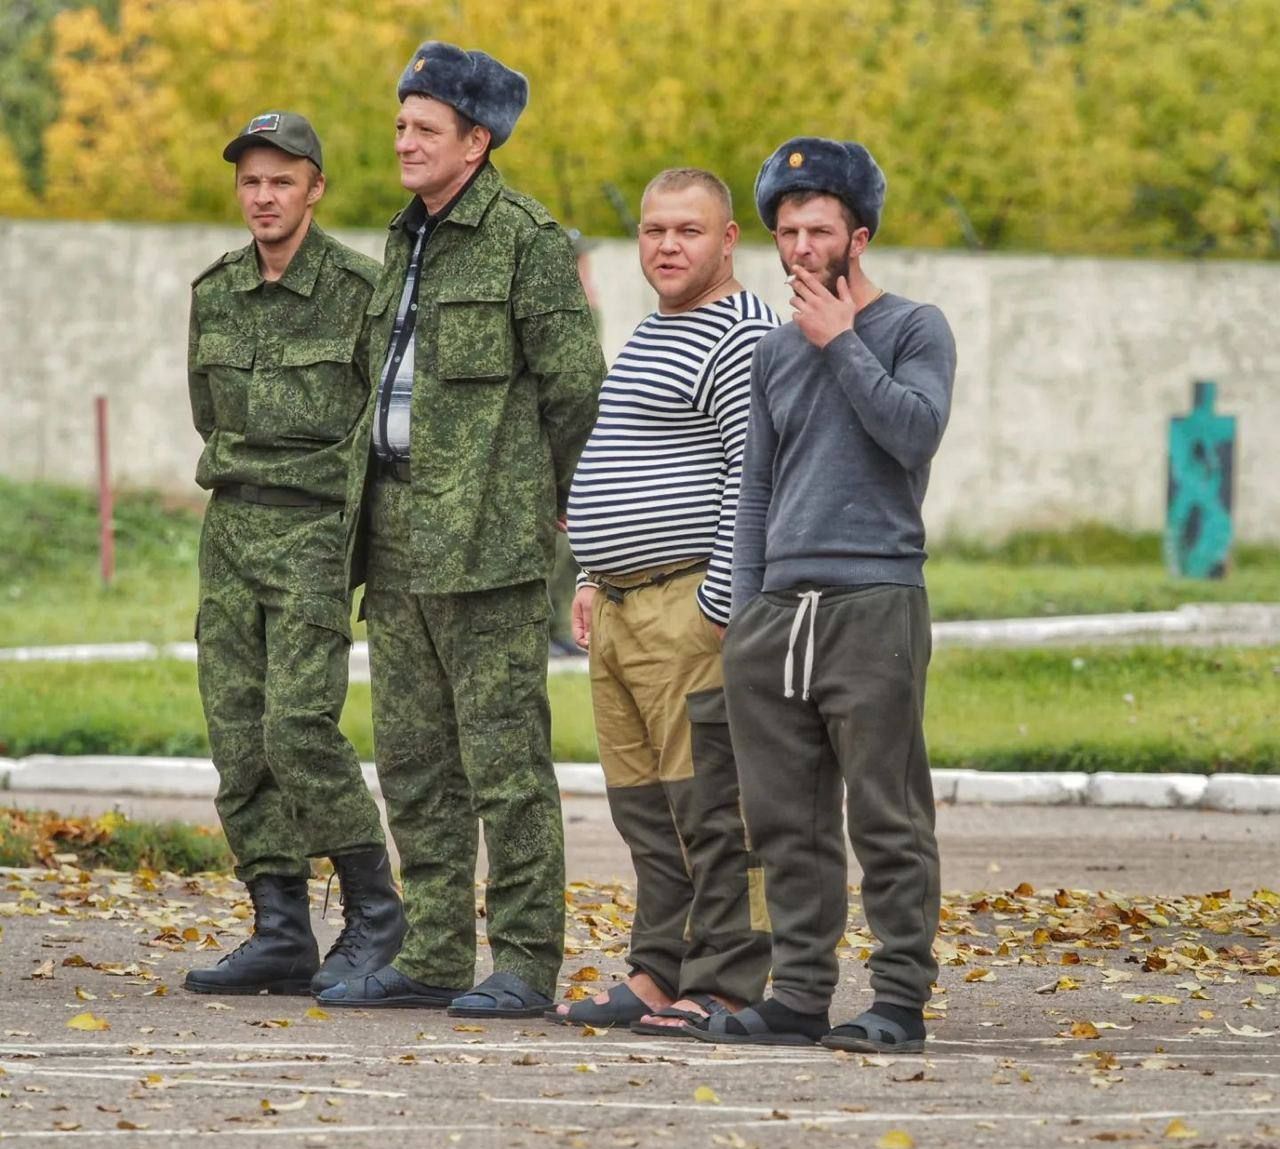 Photo for illustration / Mobilized Russians arrive in Kherson region